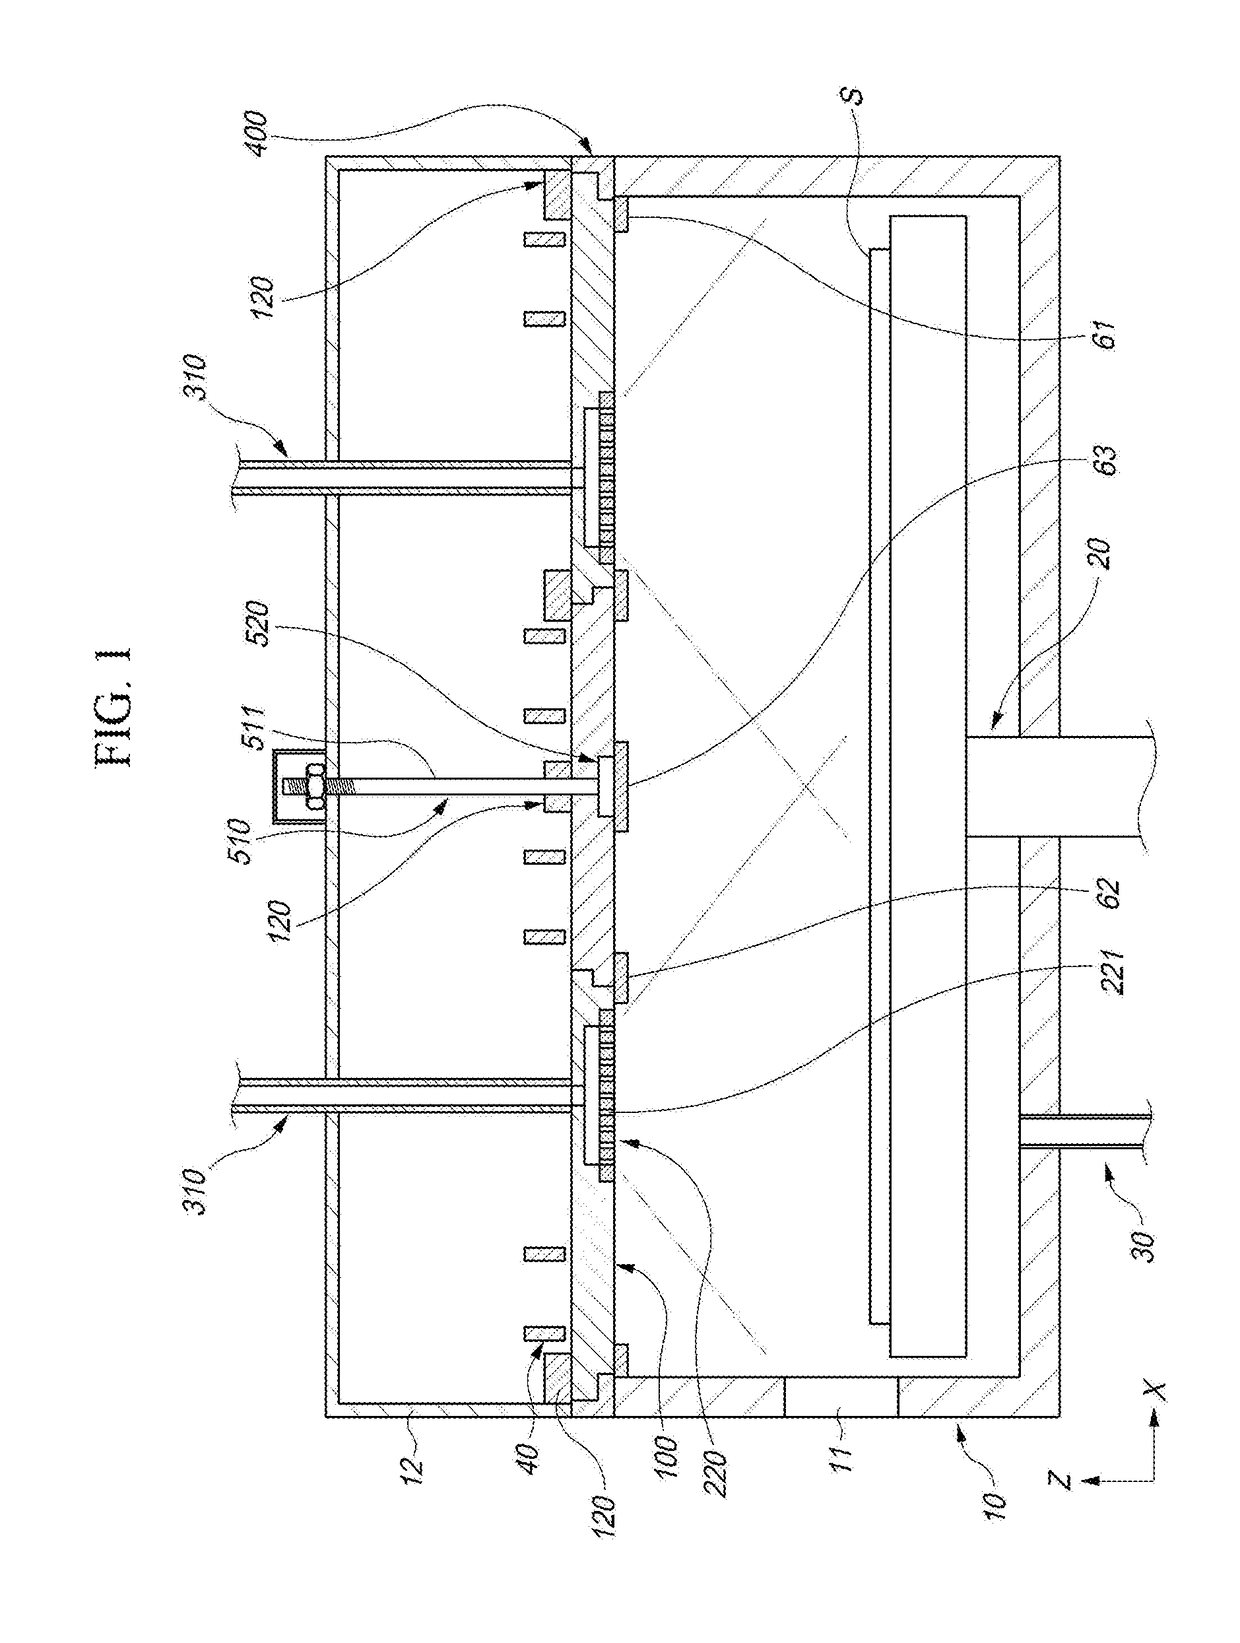 Dielectric window supporting structure for inductively coupled plasma processing apparatus